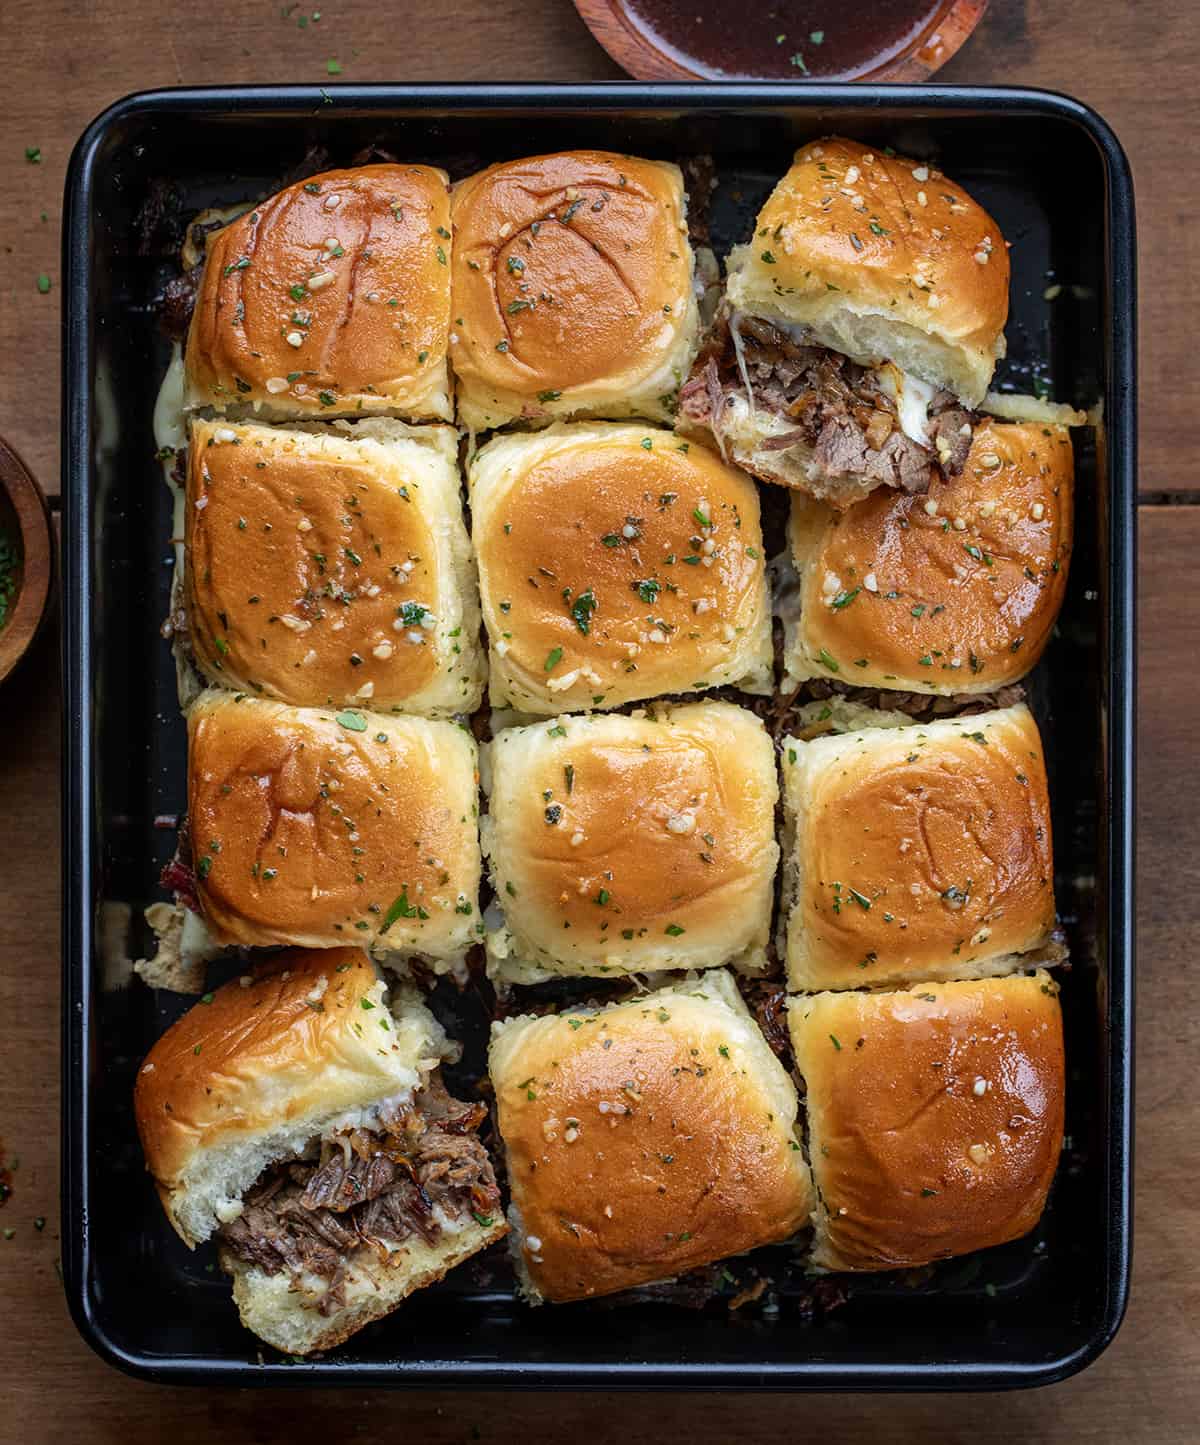 Pan of French Dip Sliders with some sliders on their side on a wooden table from overhead. 